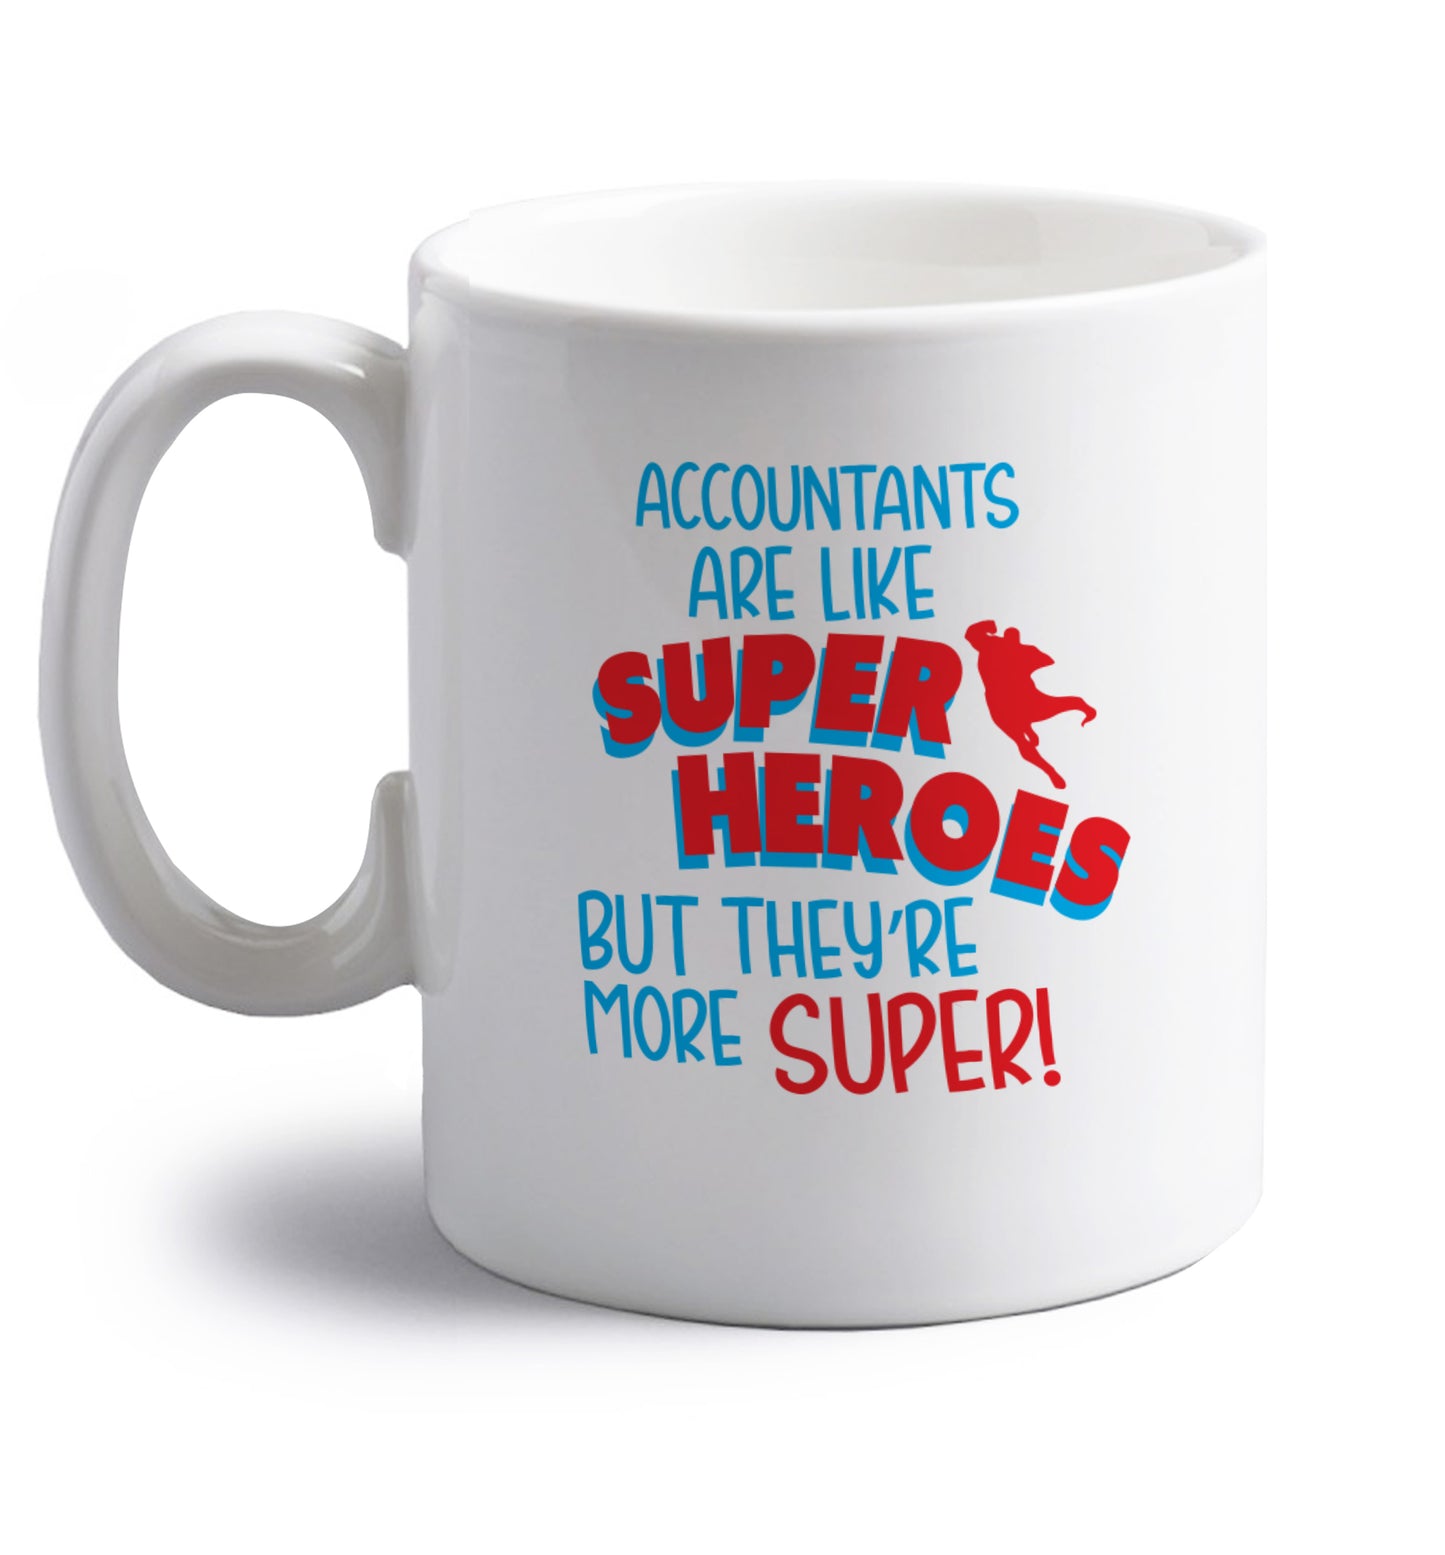 Accountants are like superheroes but they're more super right handed white ceramic mug 